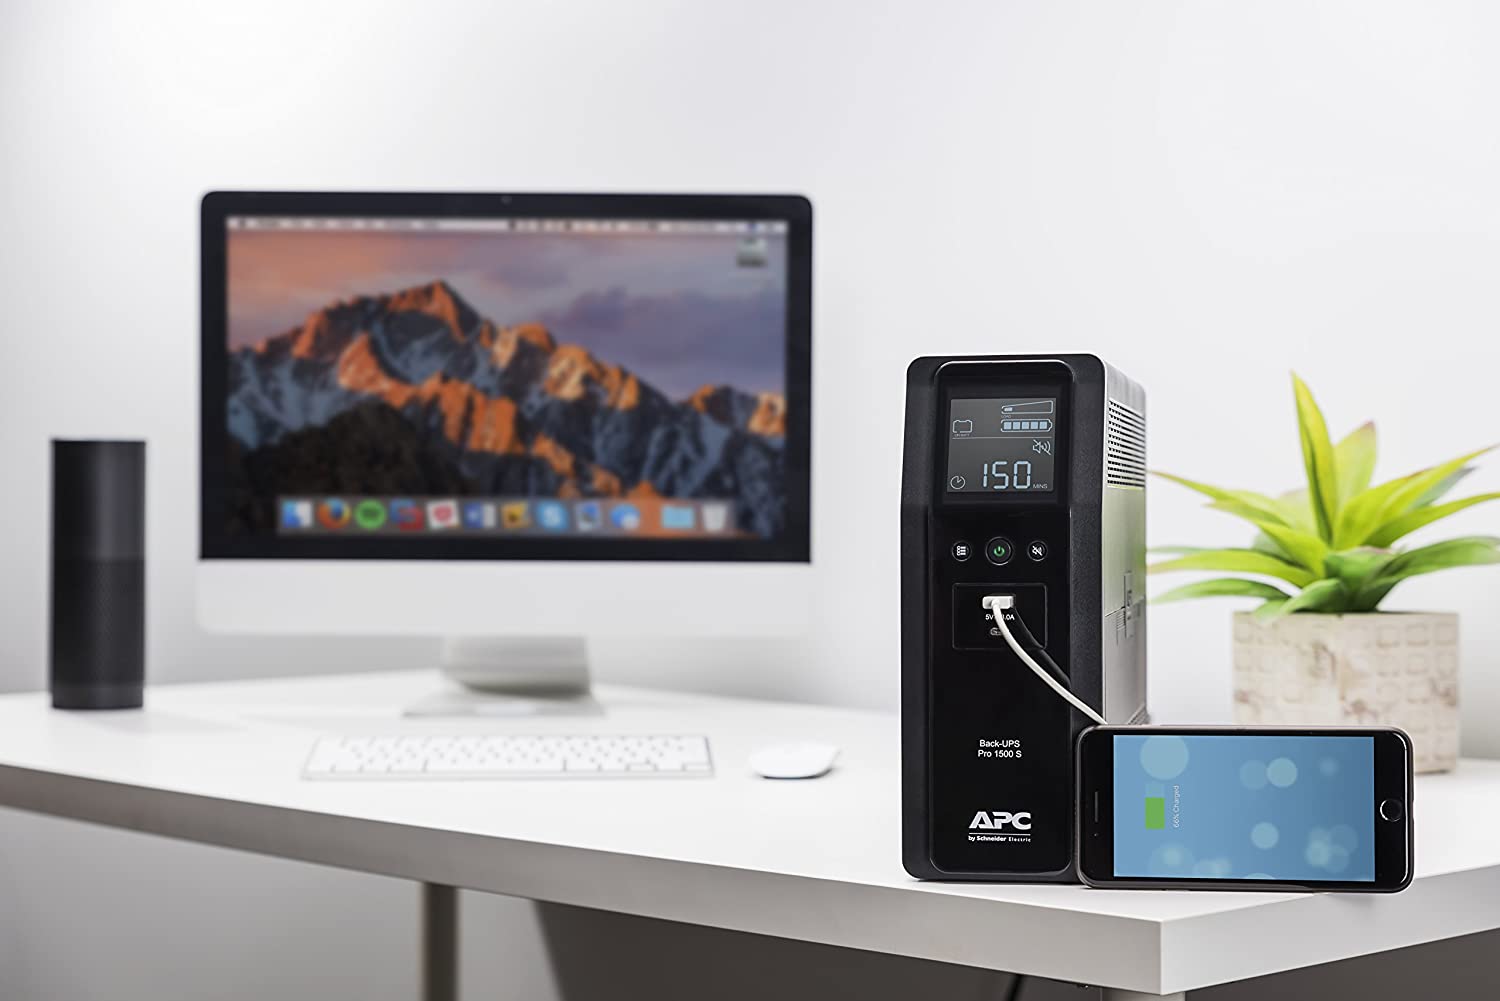 This Apc Ups Battery Backup And Surge, Large Desk Protector Clearance